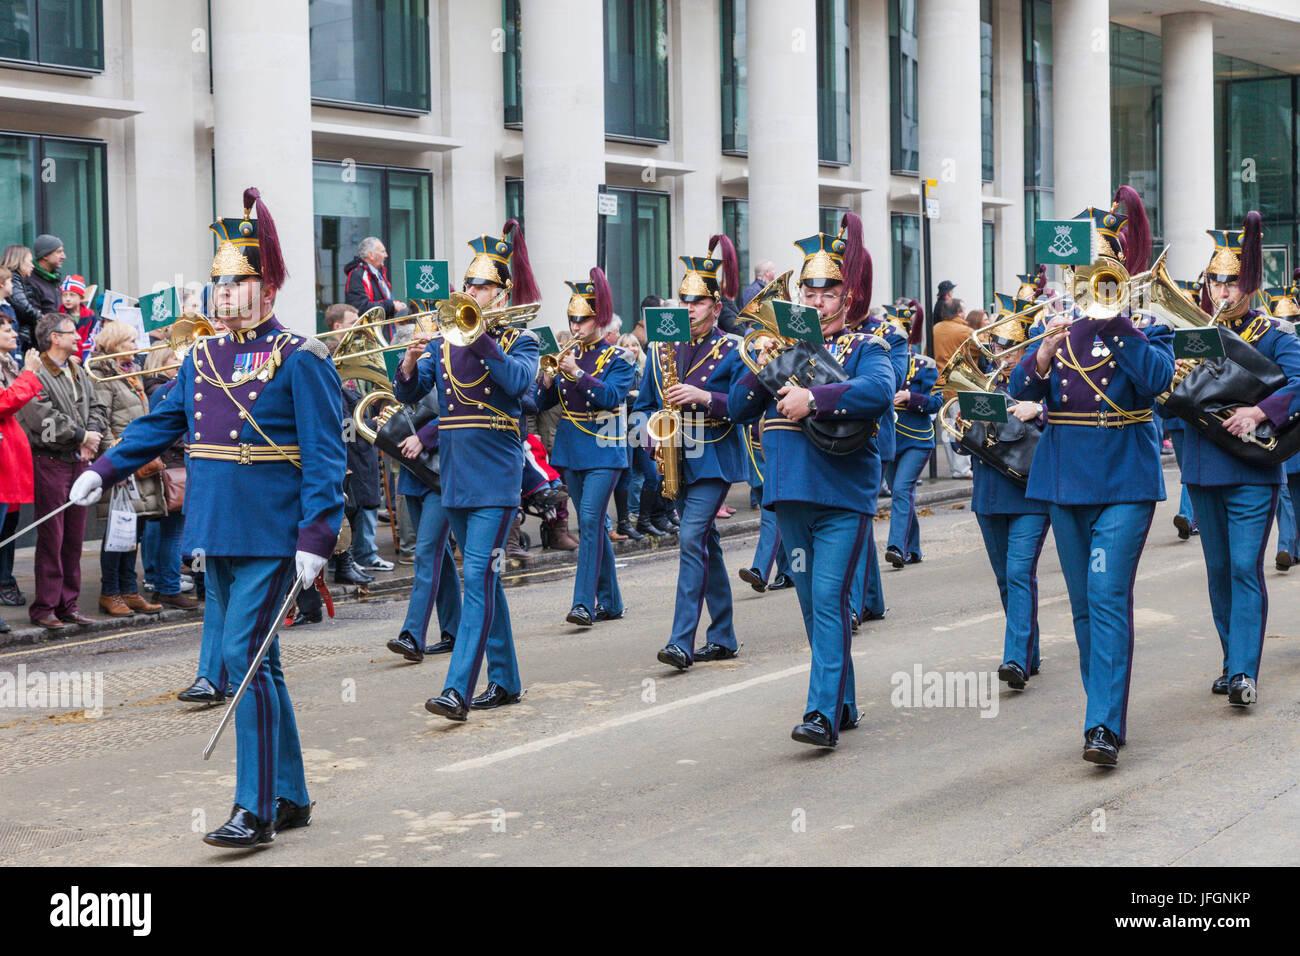 England, London, The Lord Mayor's Show, Marching Band Stock Photo